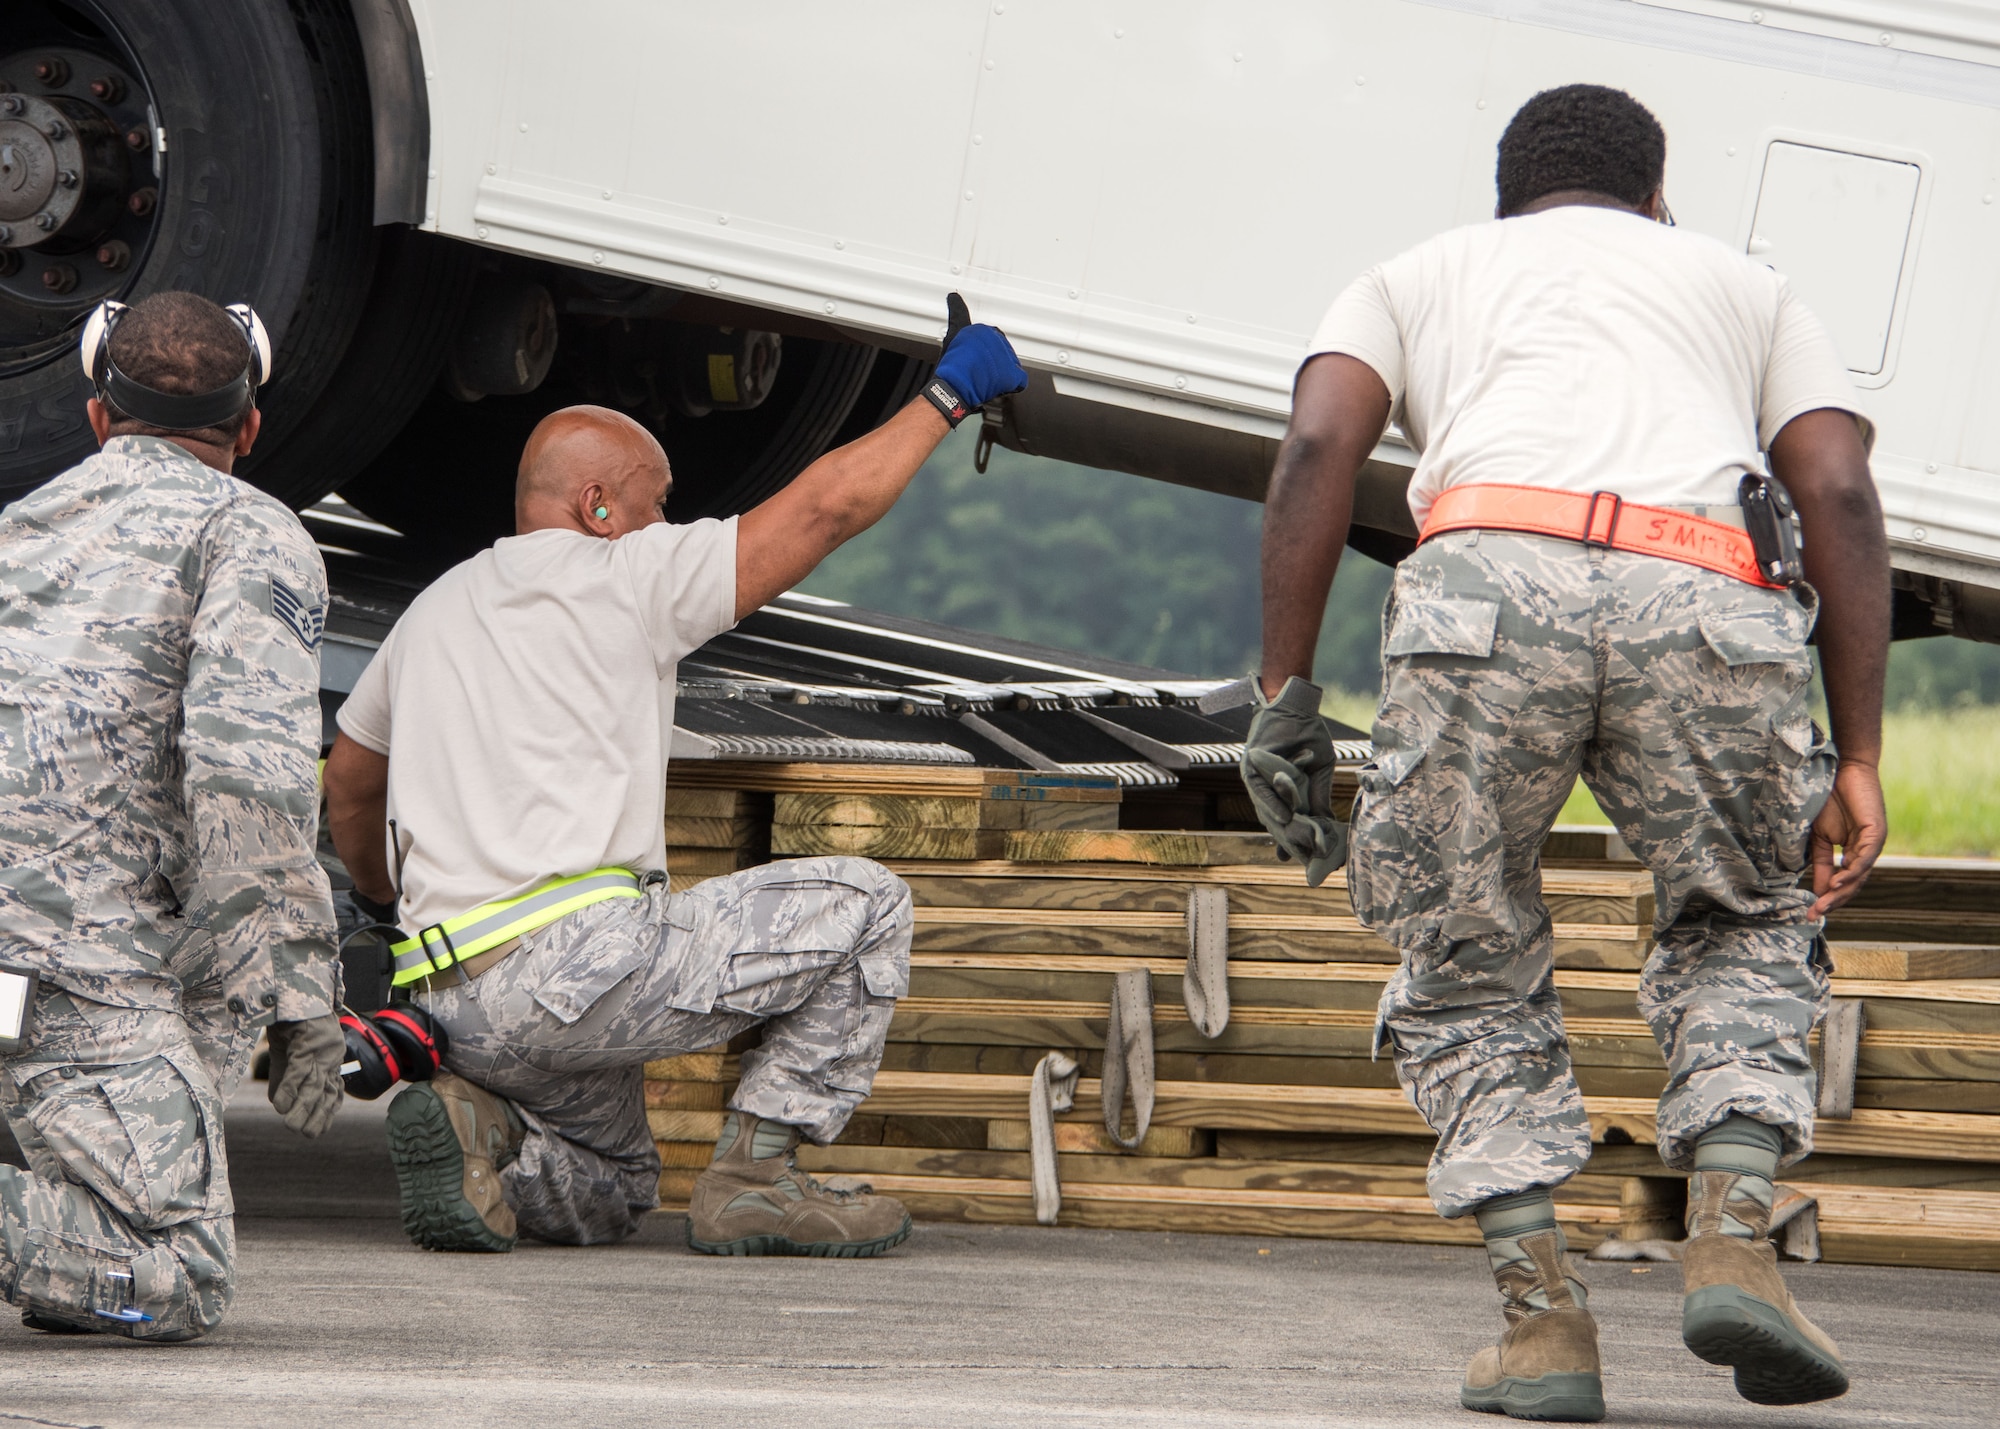 An aerial porter gives a thumbs up to the driver of a bus as it’s backed onto the cargo bay of a C-17 Globemaster III at Dobbins Air Reserve Base, Ga. Aug. 7, 2017. During the exercise, units such as the aerial port, were comprised of Airmen from different units around Air Force Reserve Command to simulate a workforce that might be expected in a deployed environment. (U.S. Air Force photo/Staff Sgt. Andrew Park)